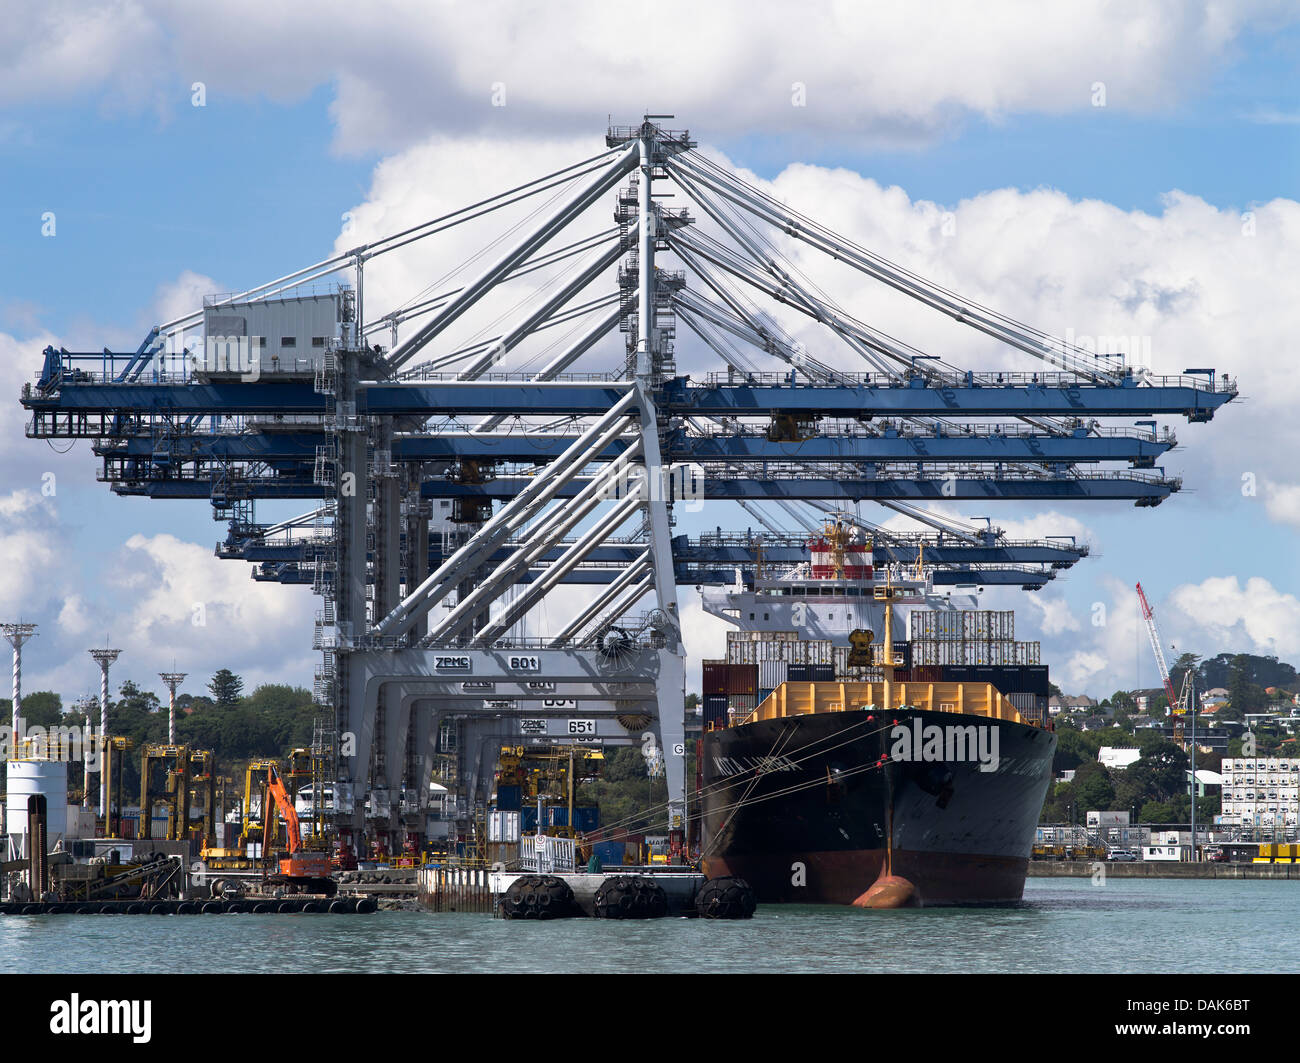 dh Harbour AUCKLAND NEW ZEALAND Cranes Port of Auckland Container terminal container crane modern nz dock loading onto ship berthed cargo containers Stock Photo